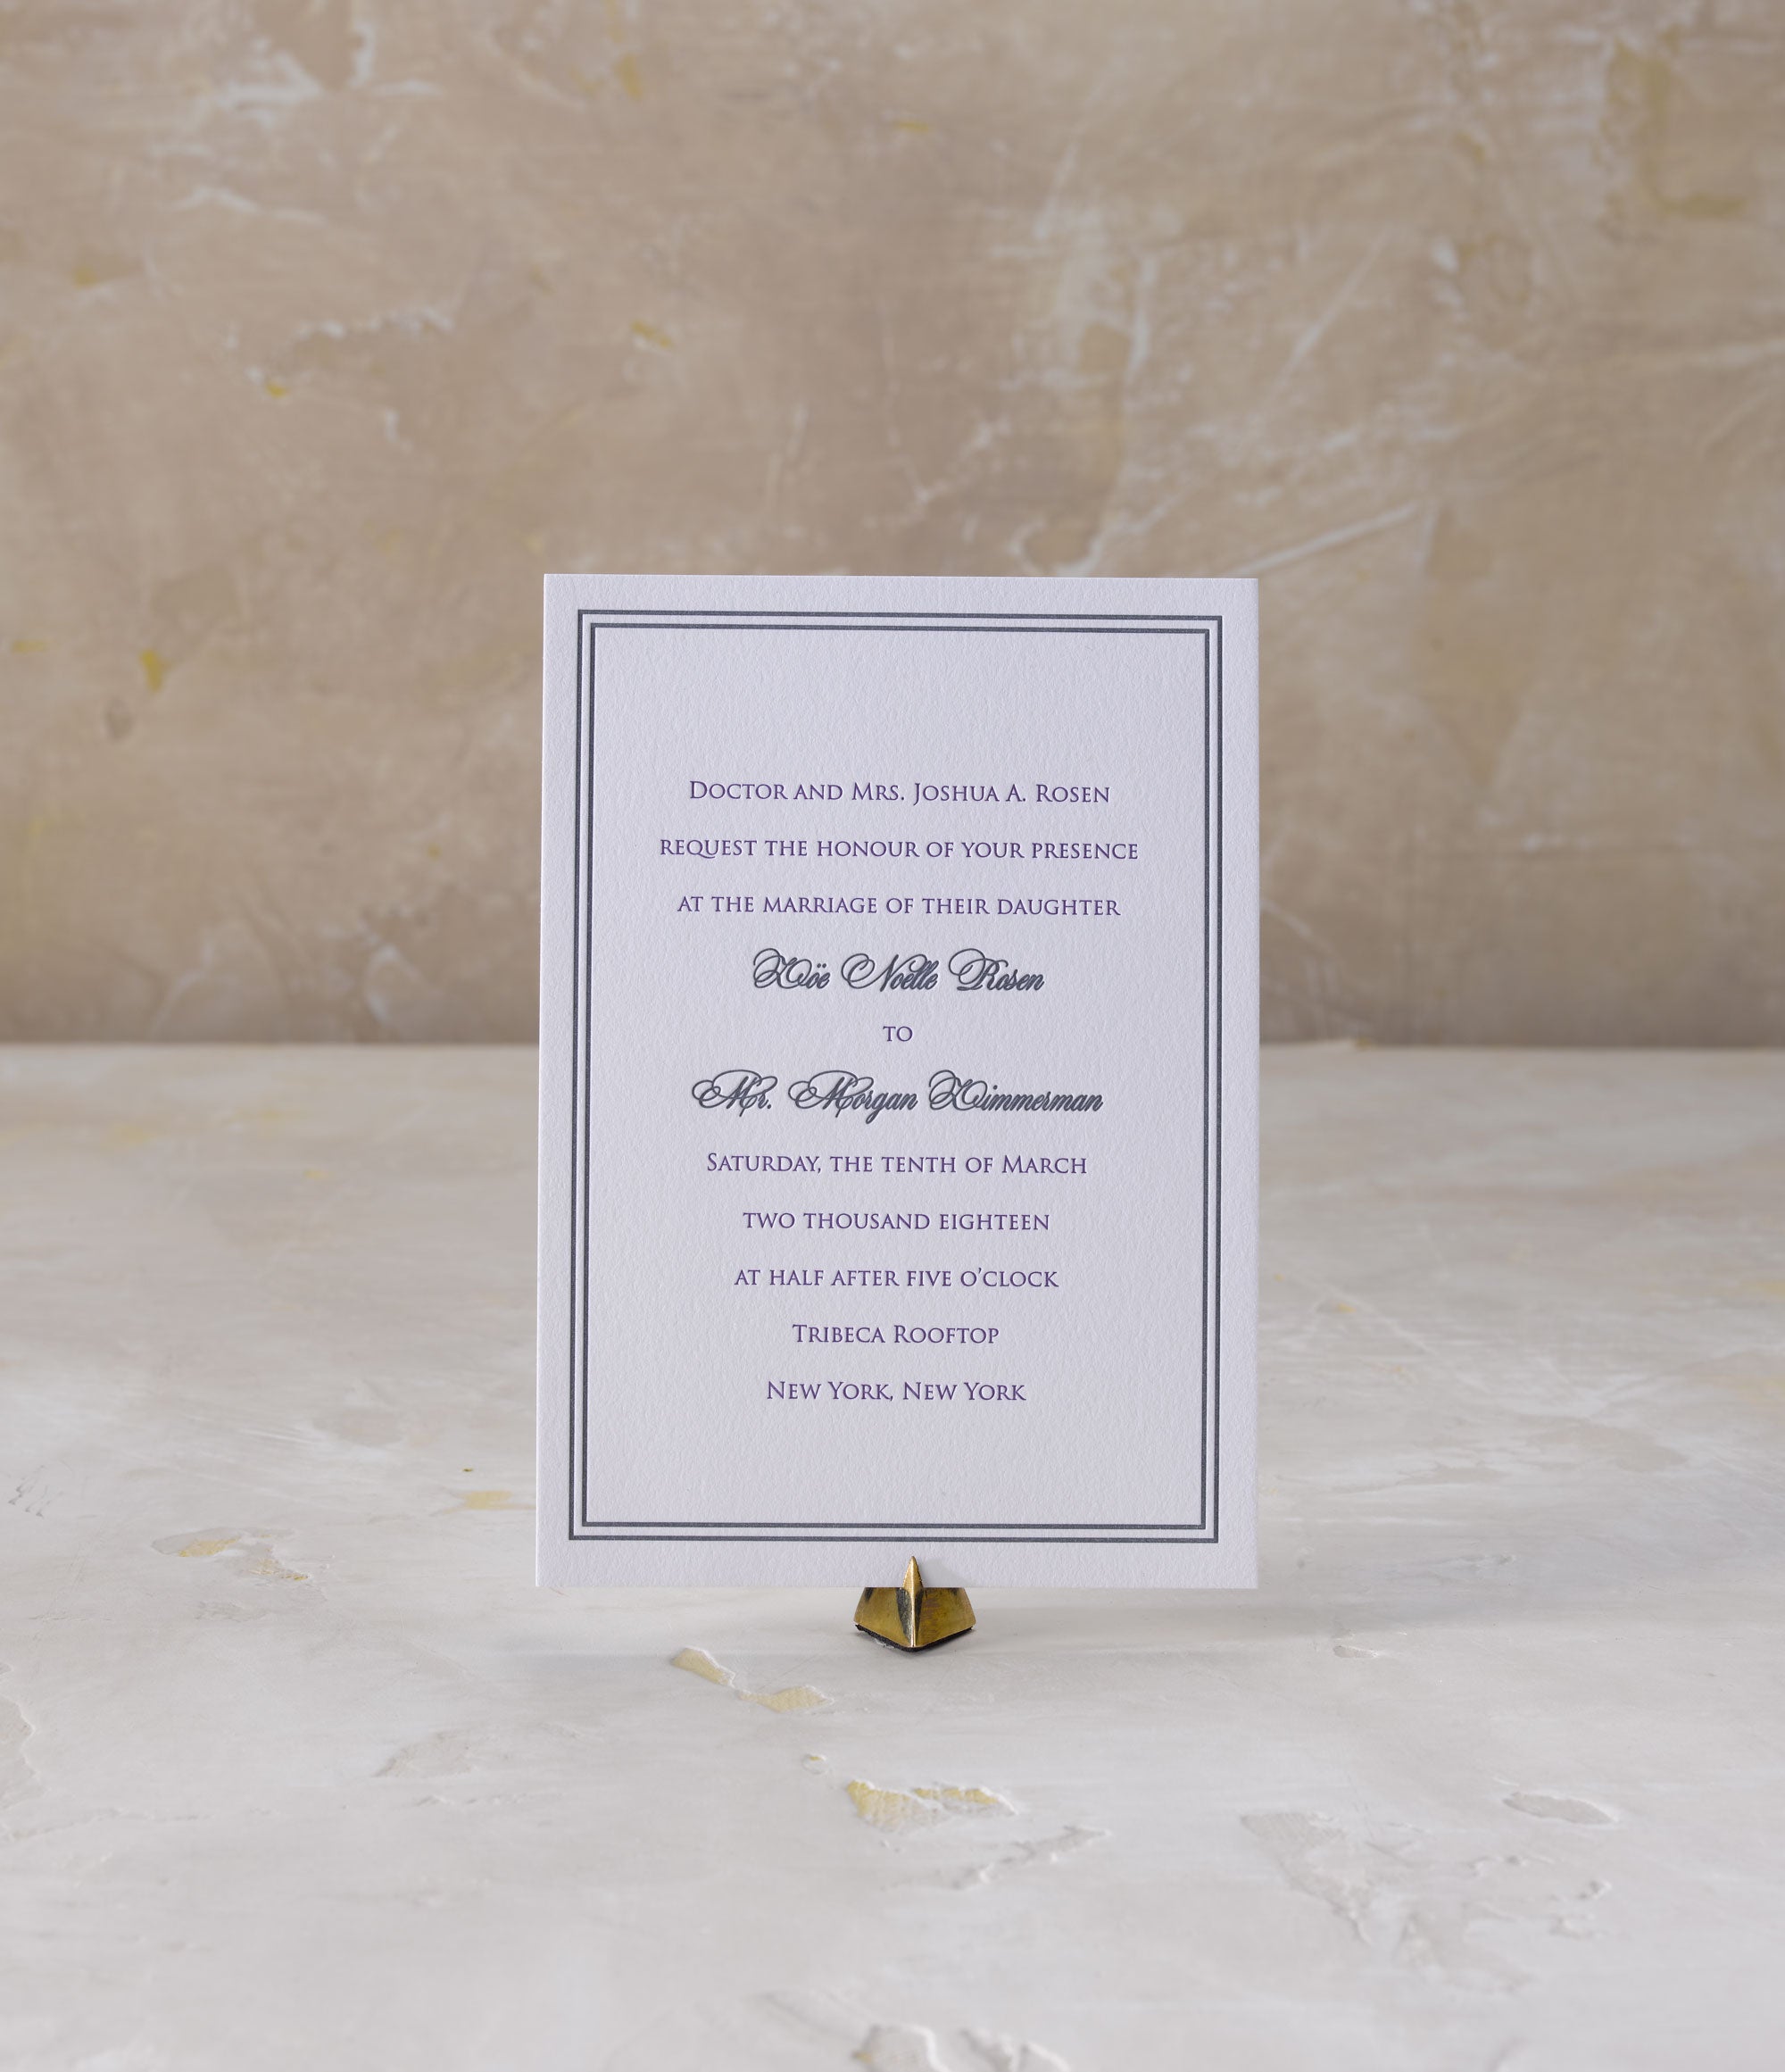 Zoe & Morgan is a letterpress wedding suite set in NYC. Would you like to be featured on #PPRealBride? Email us your photos to hello@pickettspress.com to be featured on our page! Shop here for more Pickett's Press wedding suites!